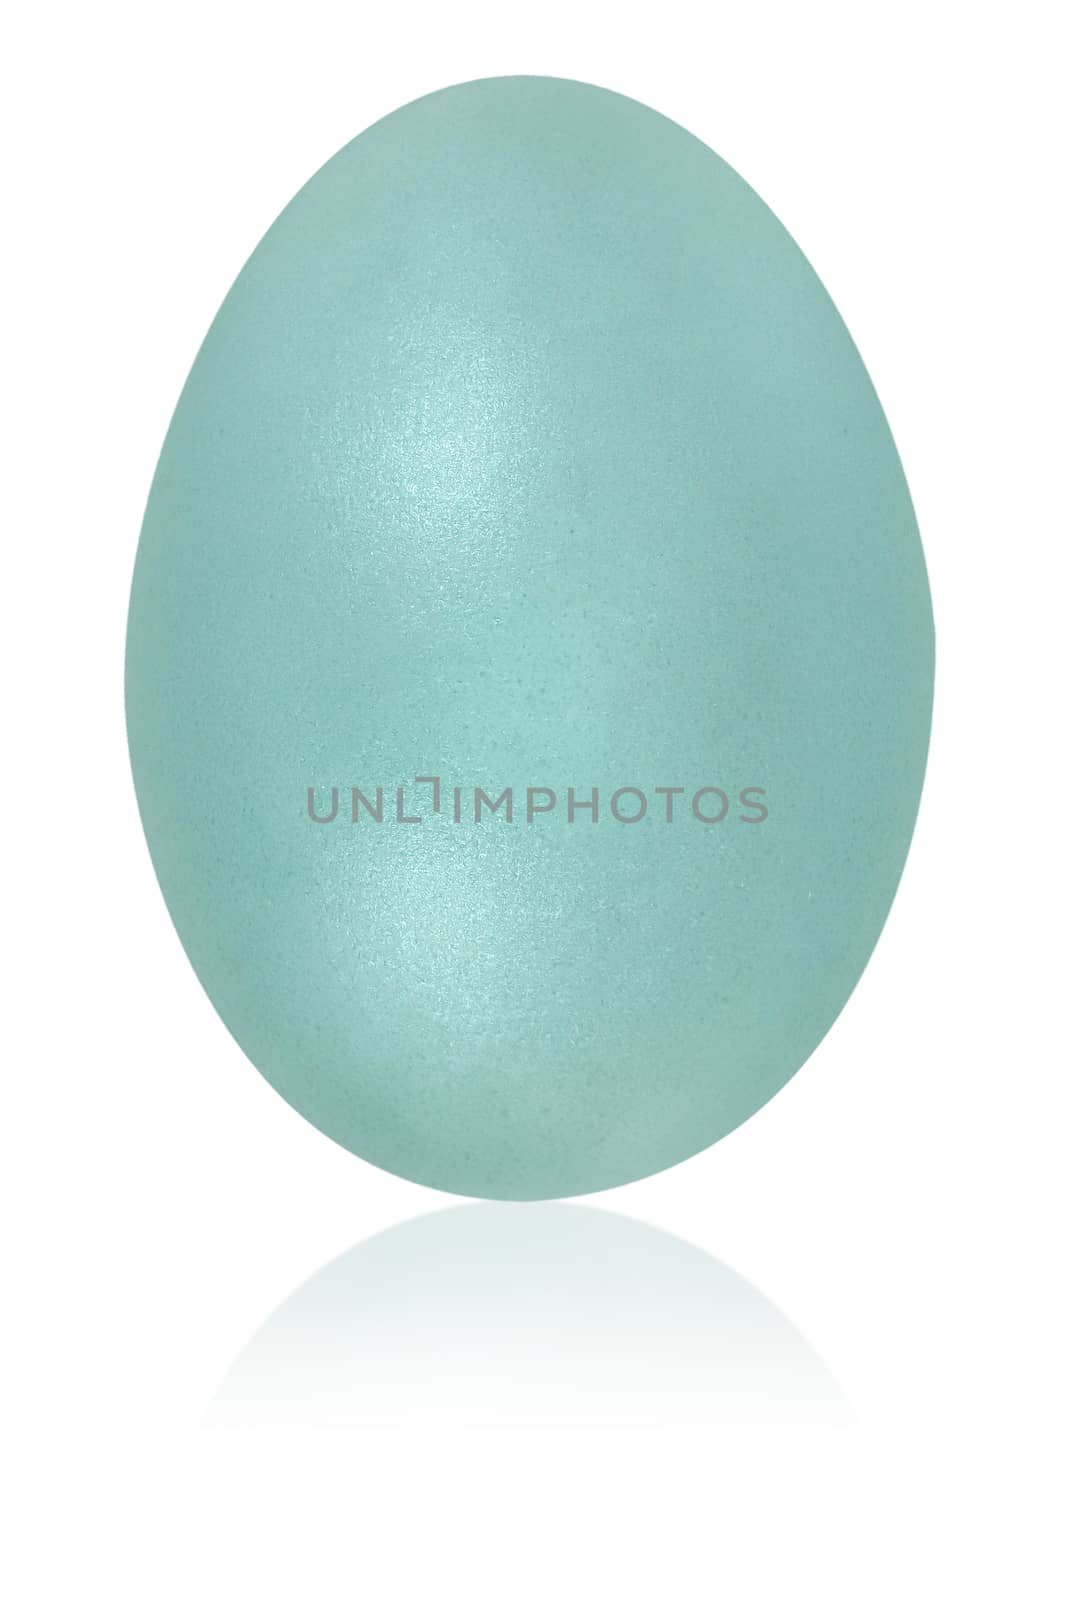 powder blue egg by fadeinphotography